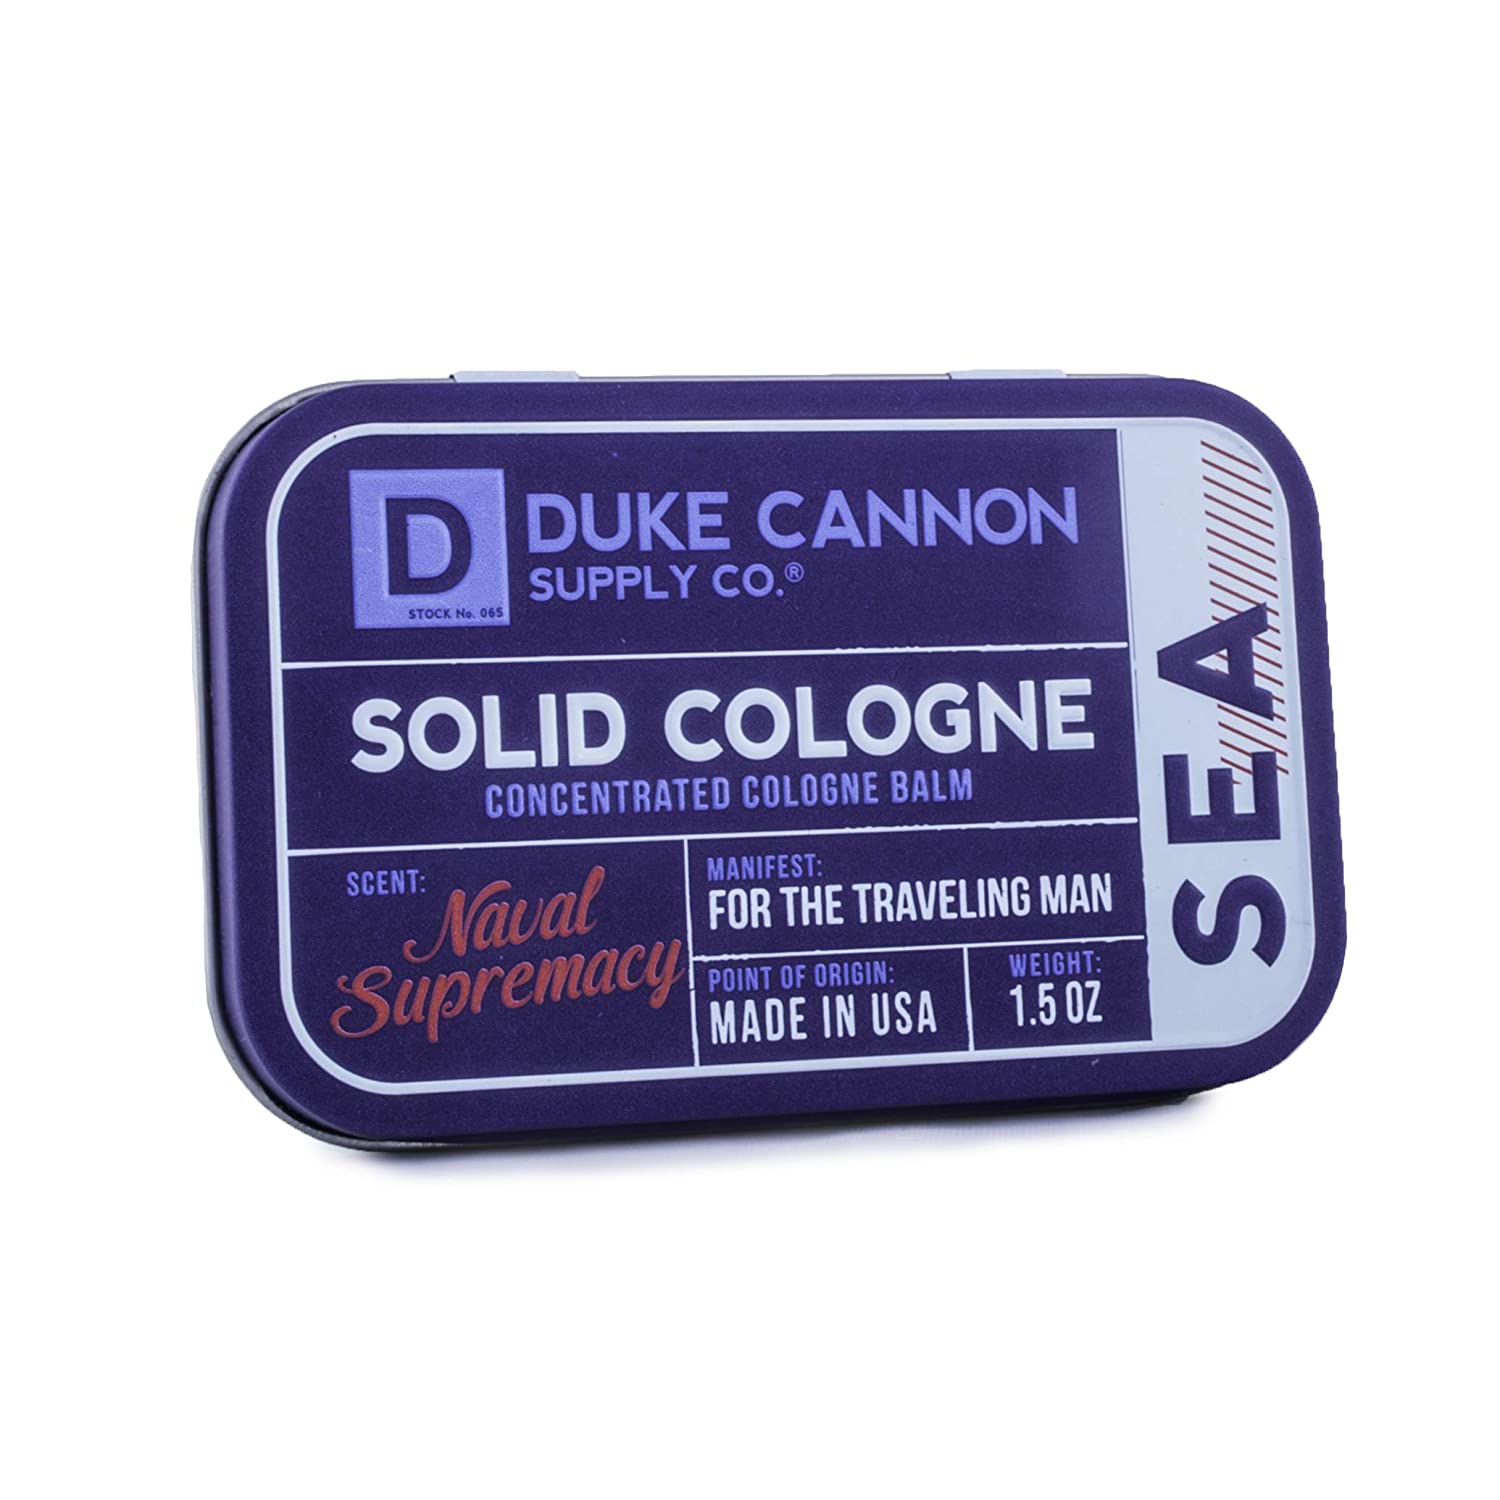 [In stock｜Free Shipping] Duke Cannon - Navy Solid Cologne Navy Supremacy Scent｜Cologne｜Solid Cologne Sea Naval Supremacy Scent